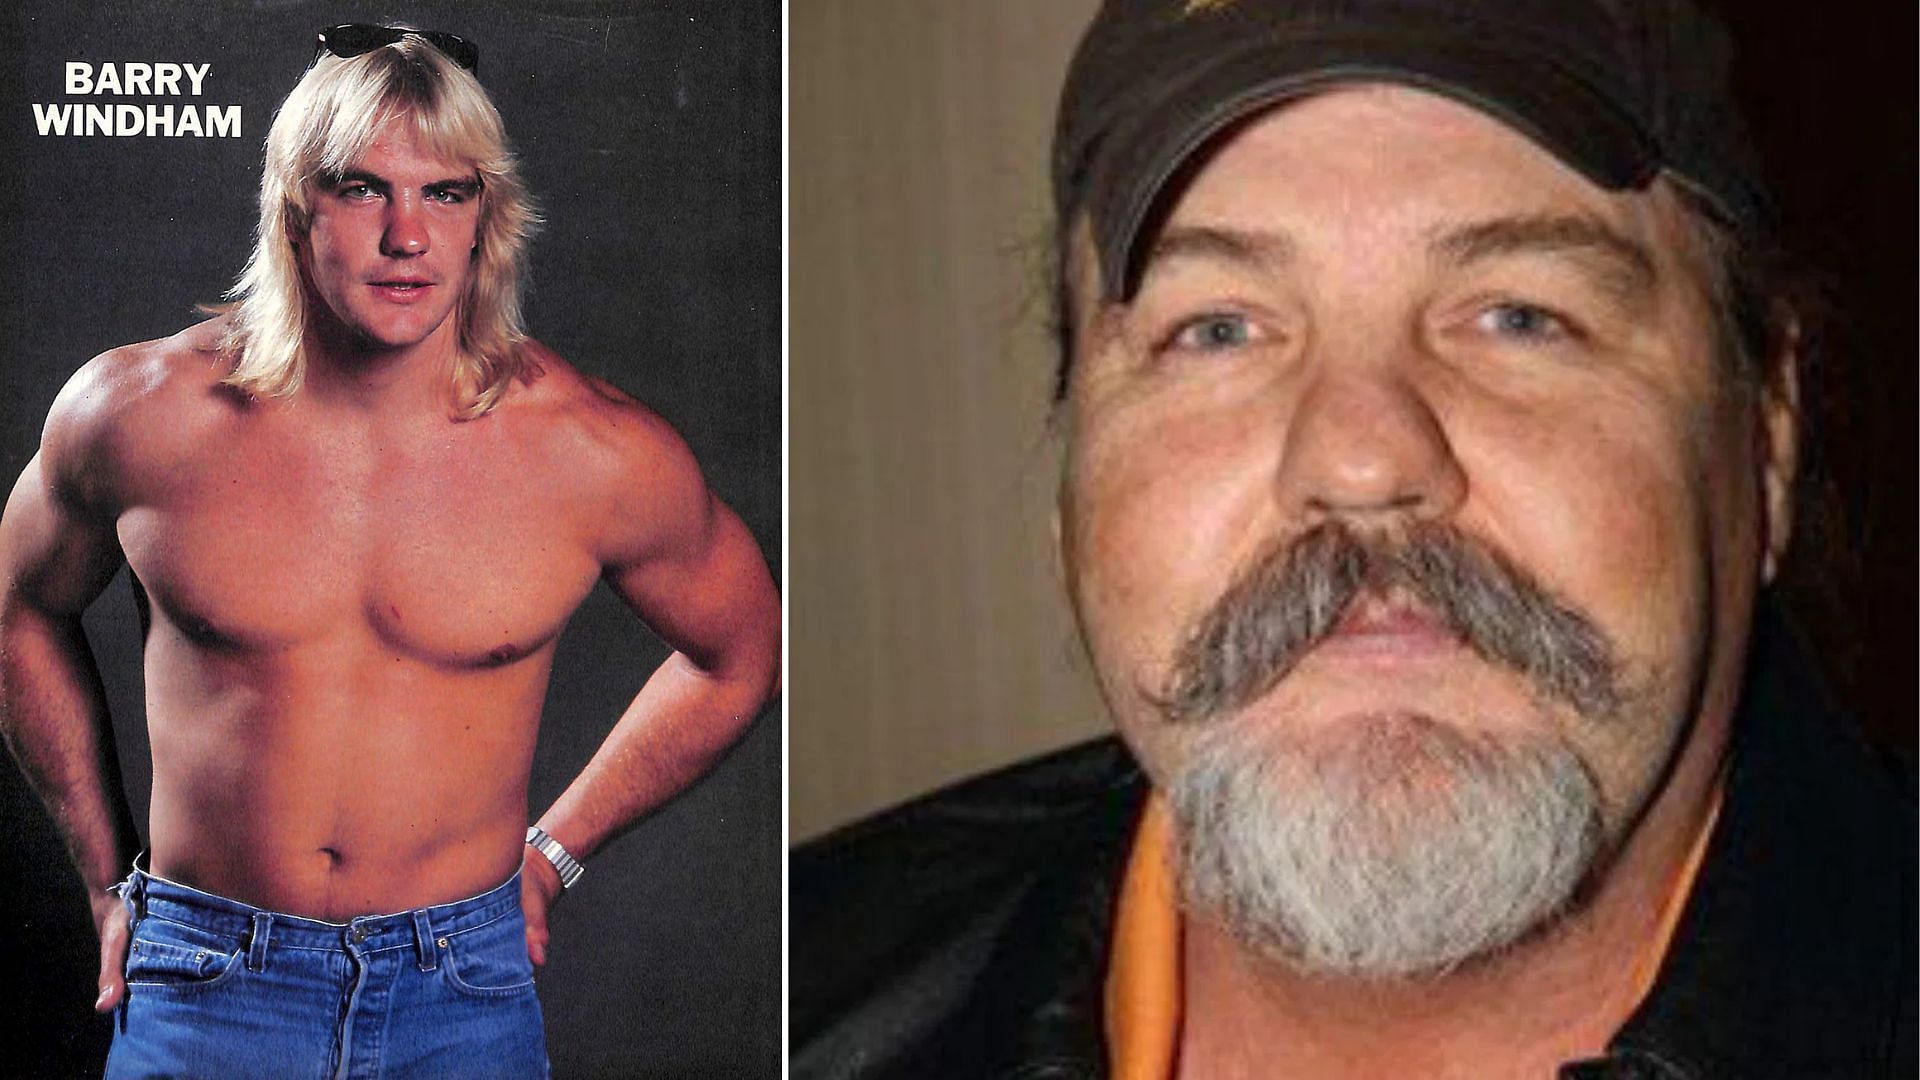 Barry Windham is better recognized by the younger generation as....Uncle Howdy?